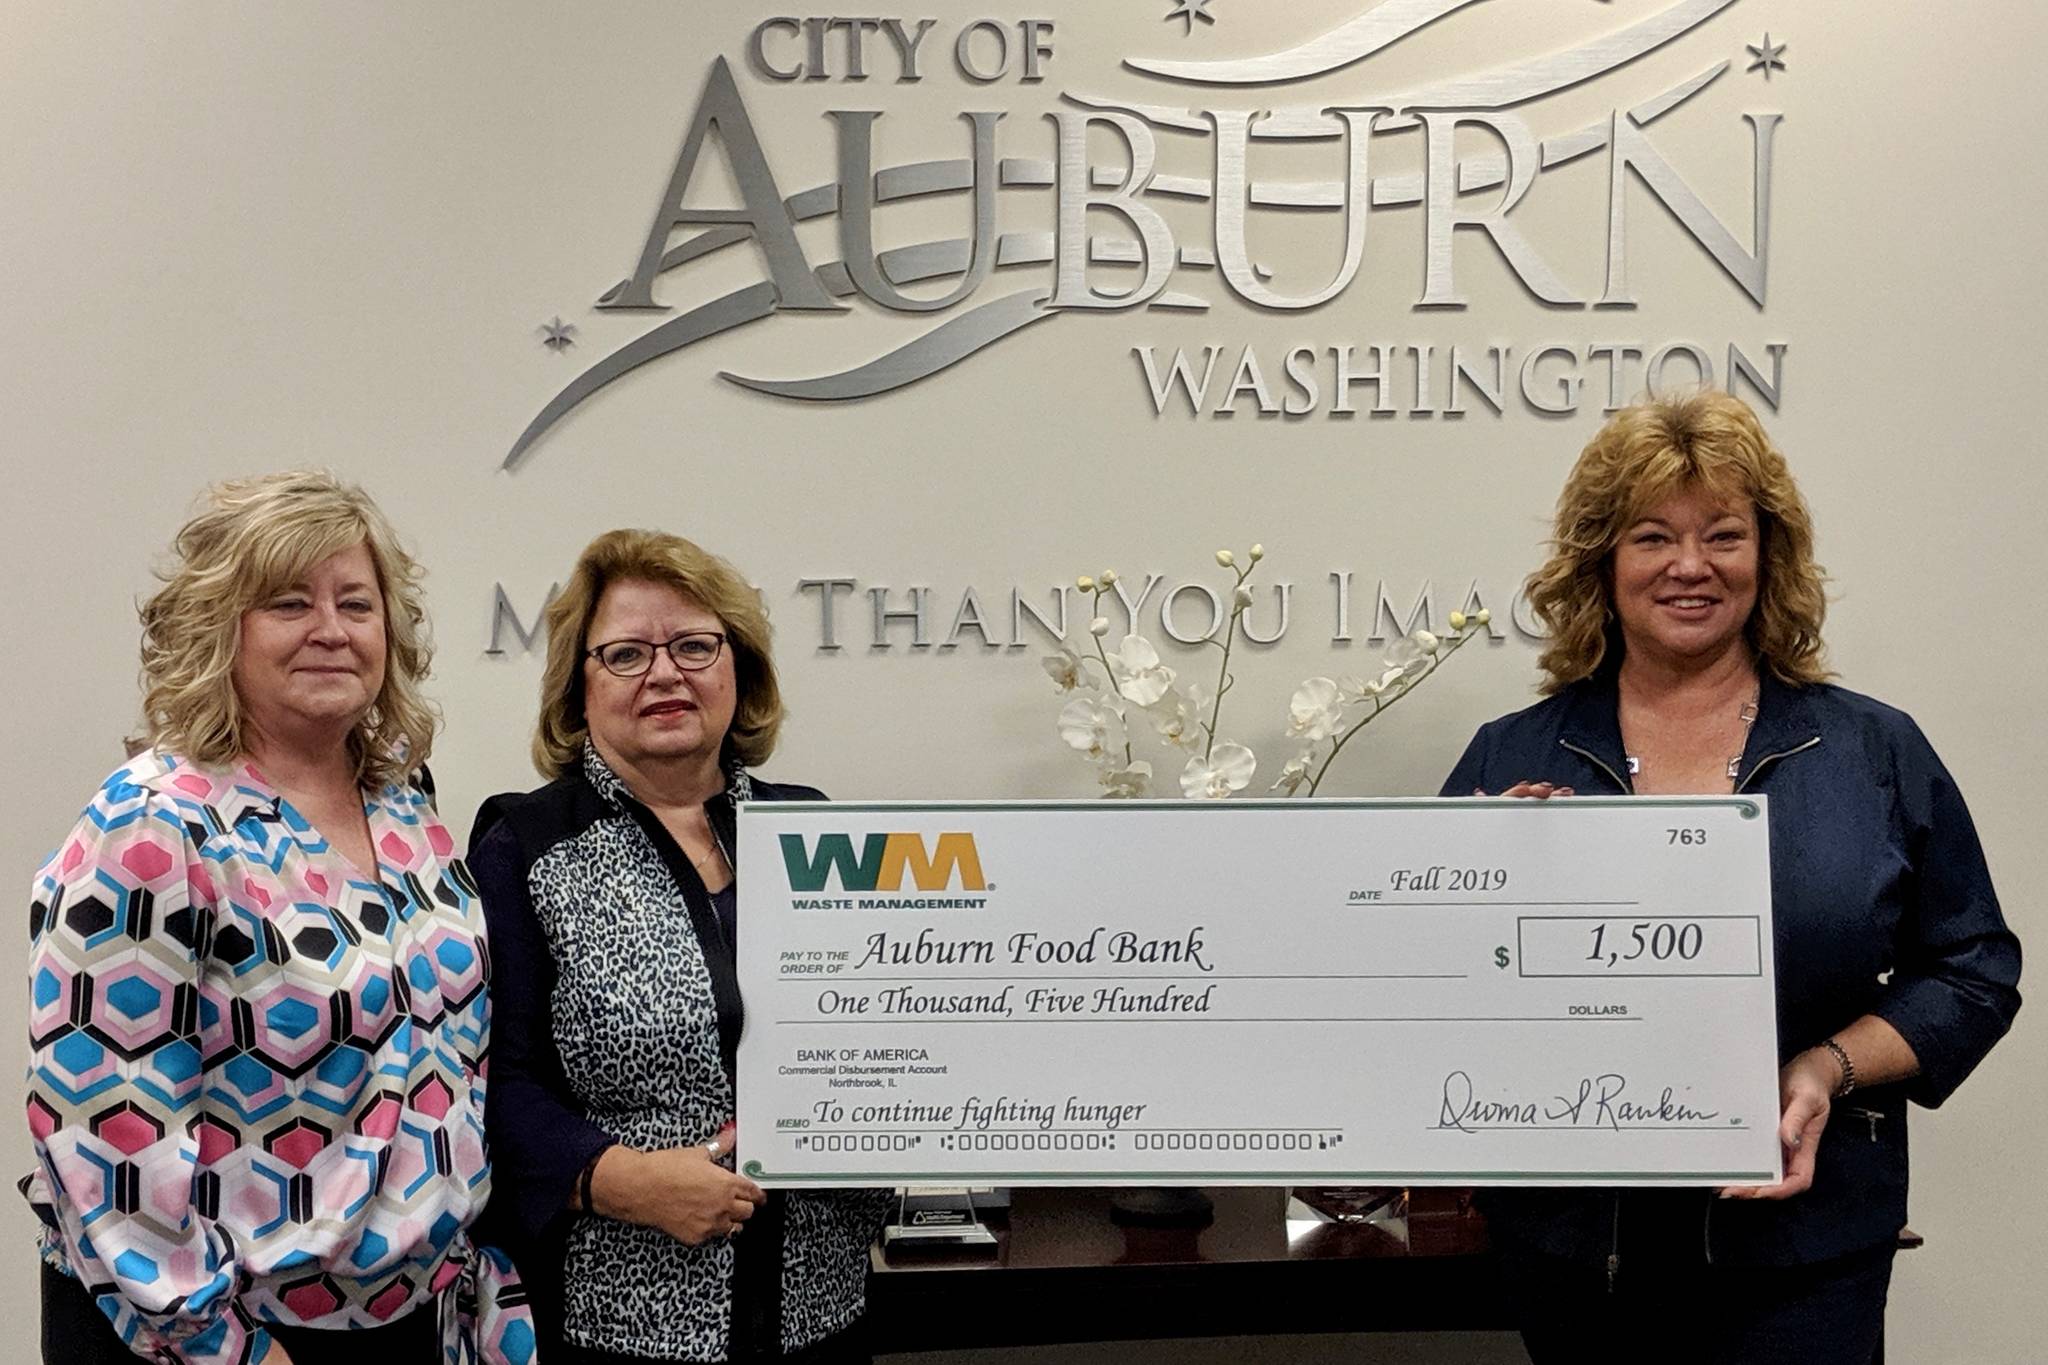 Waste Management presents a $1,500 check to the Auburn Food Bank in the community’s fight against hunger on Thursday at City Hall. From left, Laura Moser, municipal & community relations manager at Waste Management; Debbie Christian, executive director of the Auburn Food Bank; and Auburn Mayor Nancy Backus. COURTESY PHOTO, Waste Management